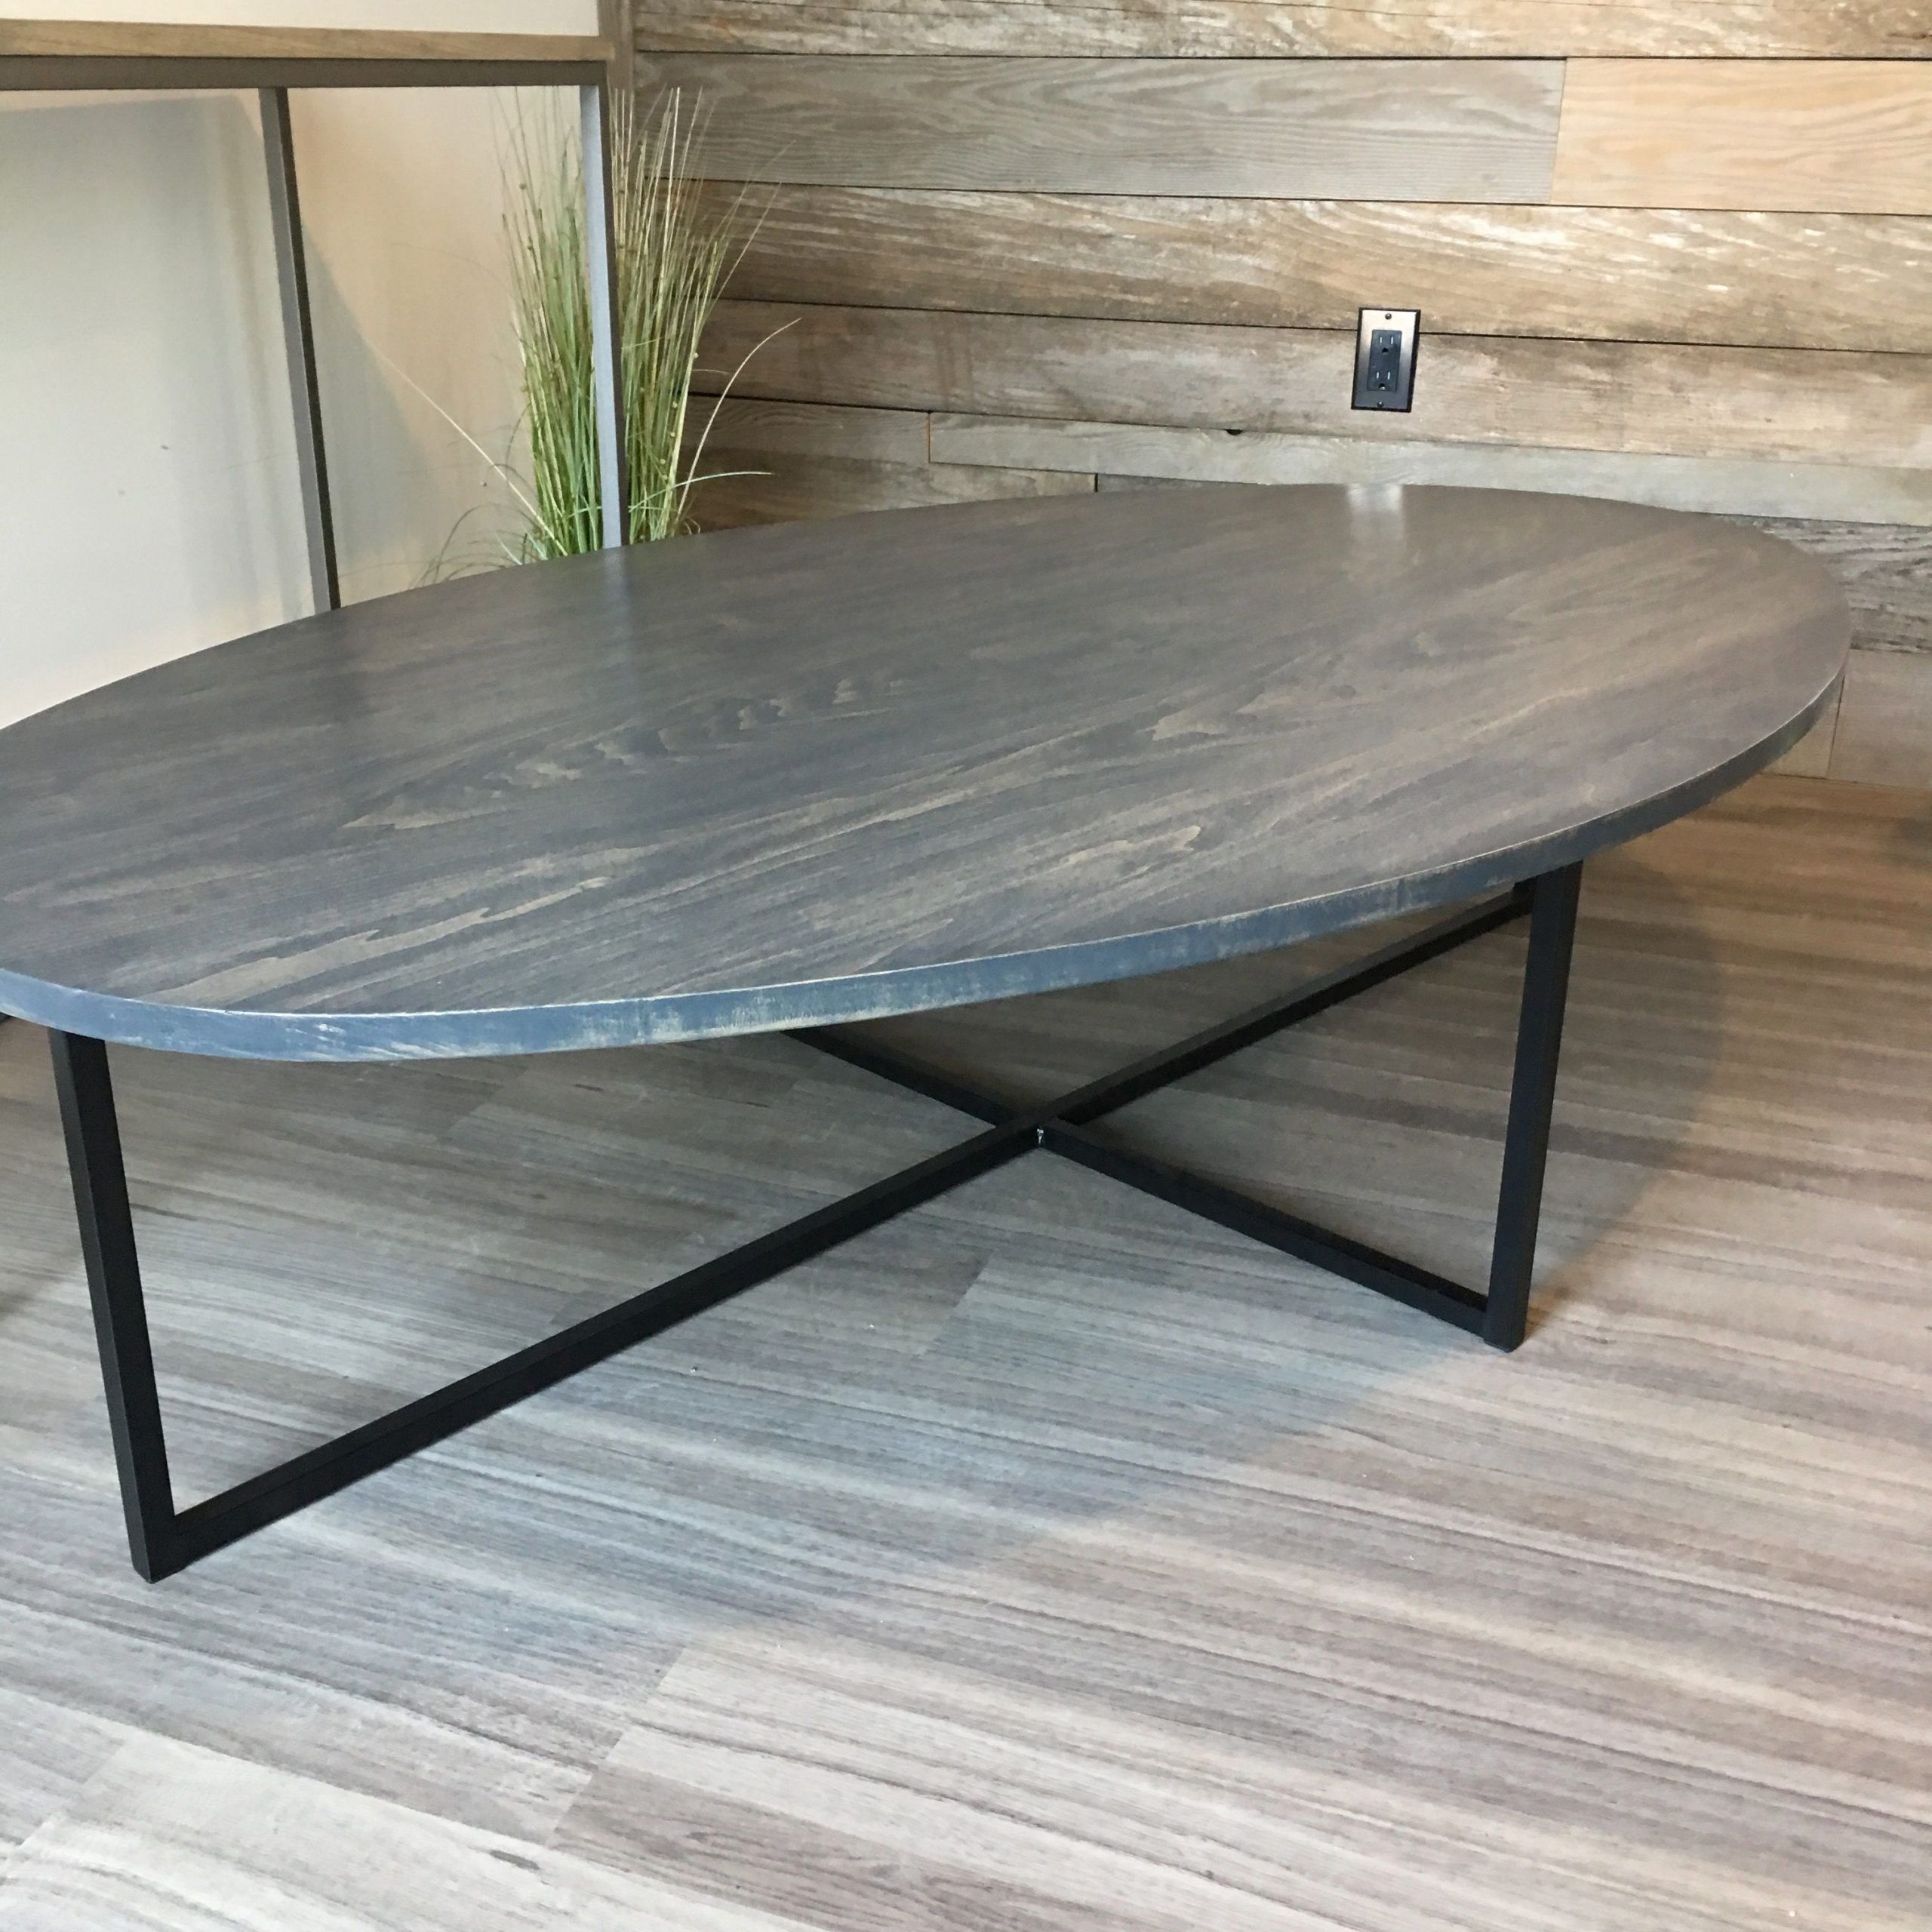 Gray Driftwood And Metal Coffee Tables Inside Newest Oval Coffee Table In Dark Grey Stain With Black Steel Base (View 6 of 20)